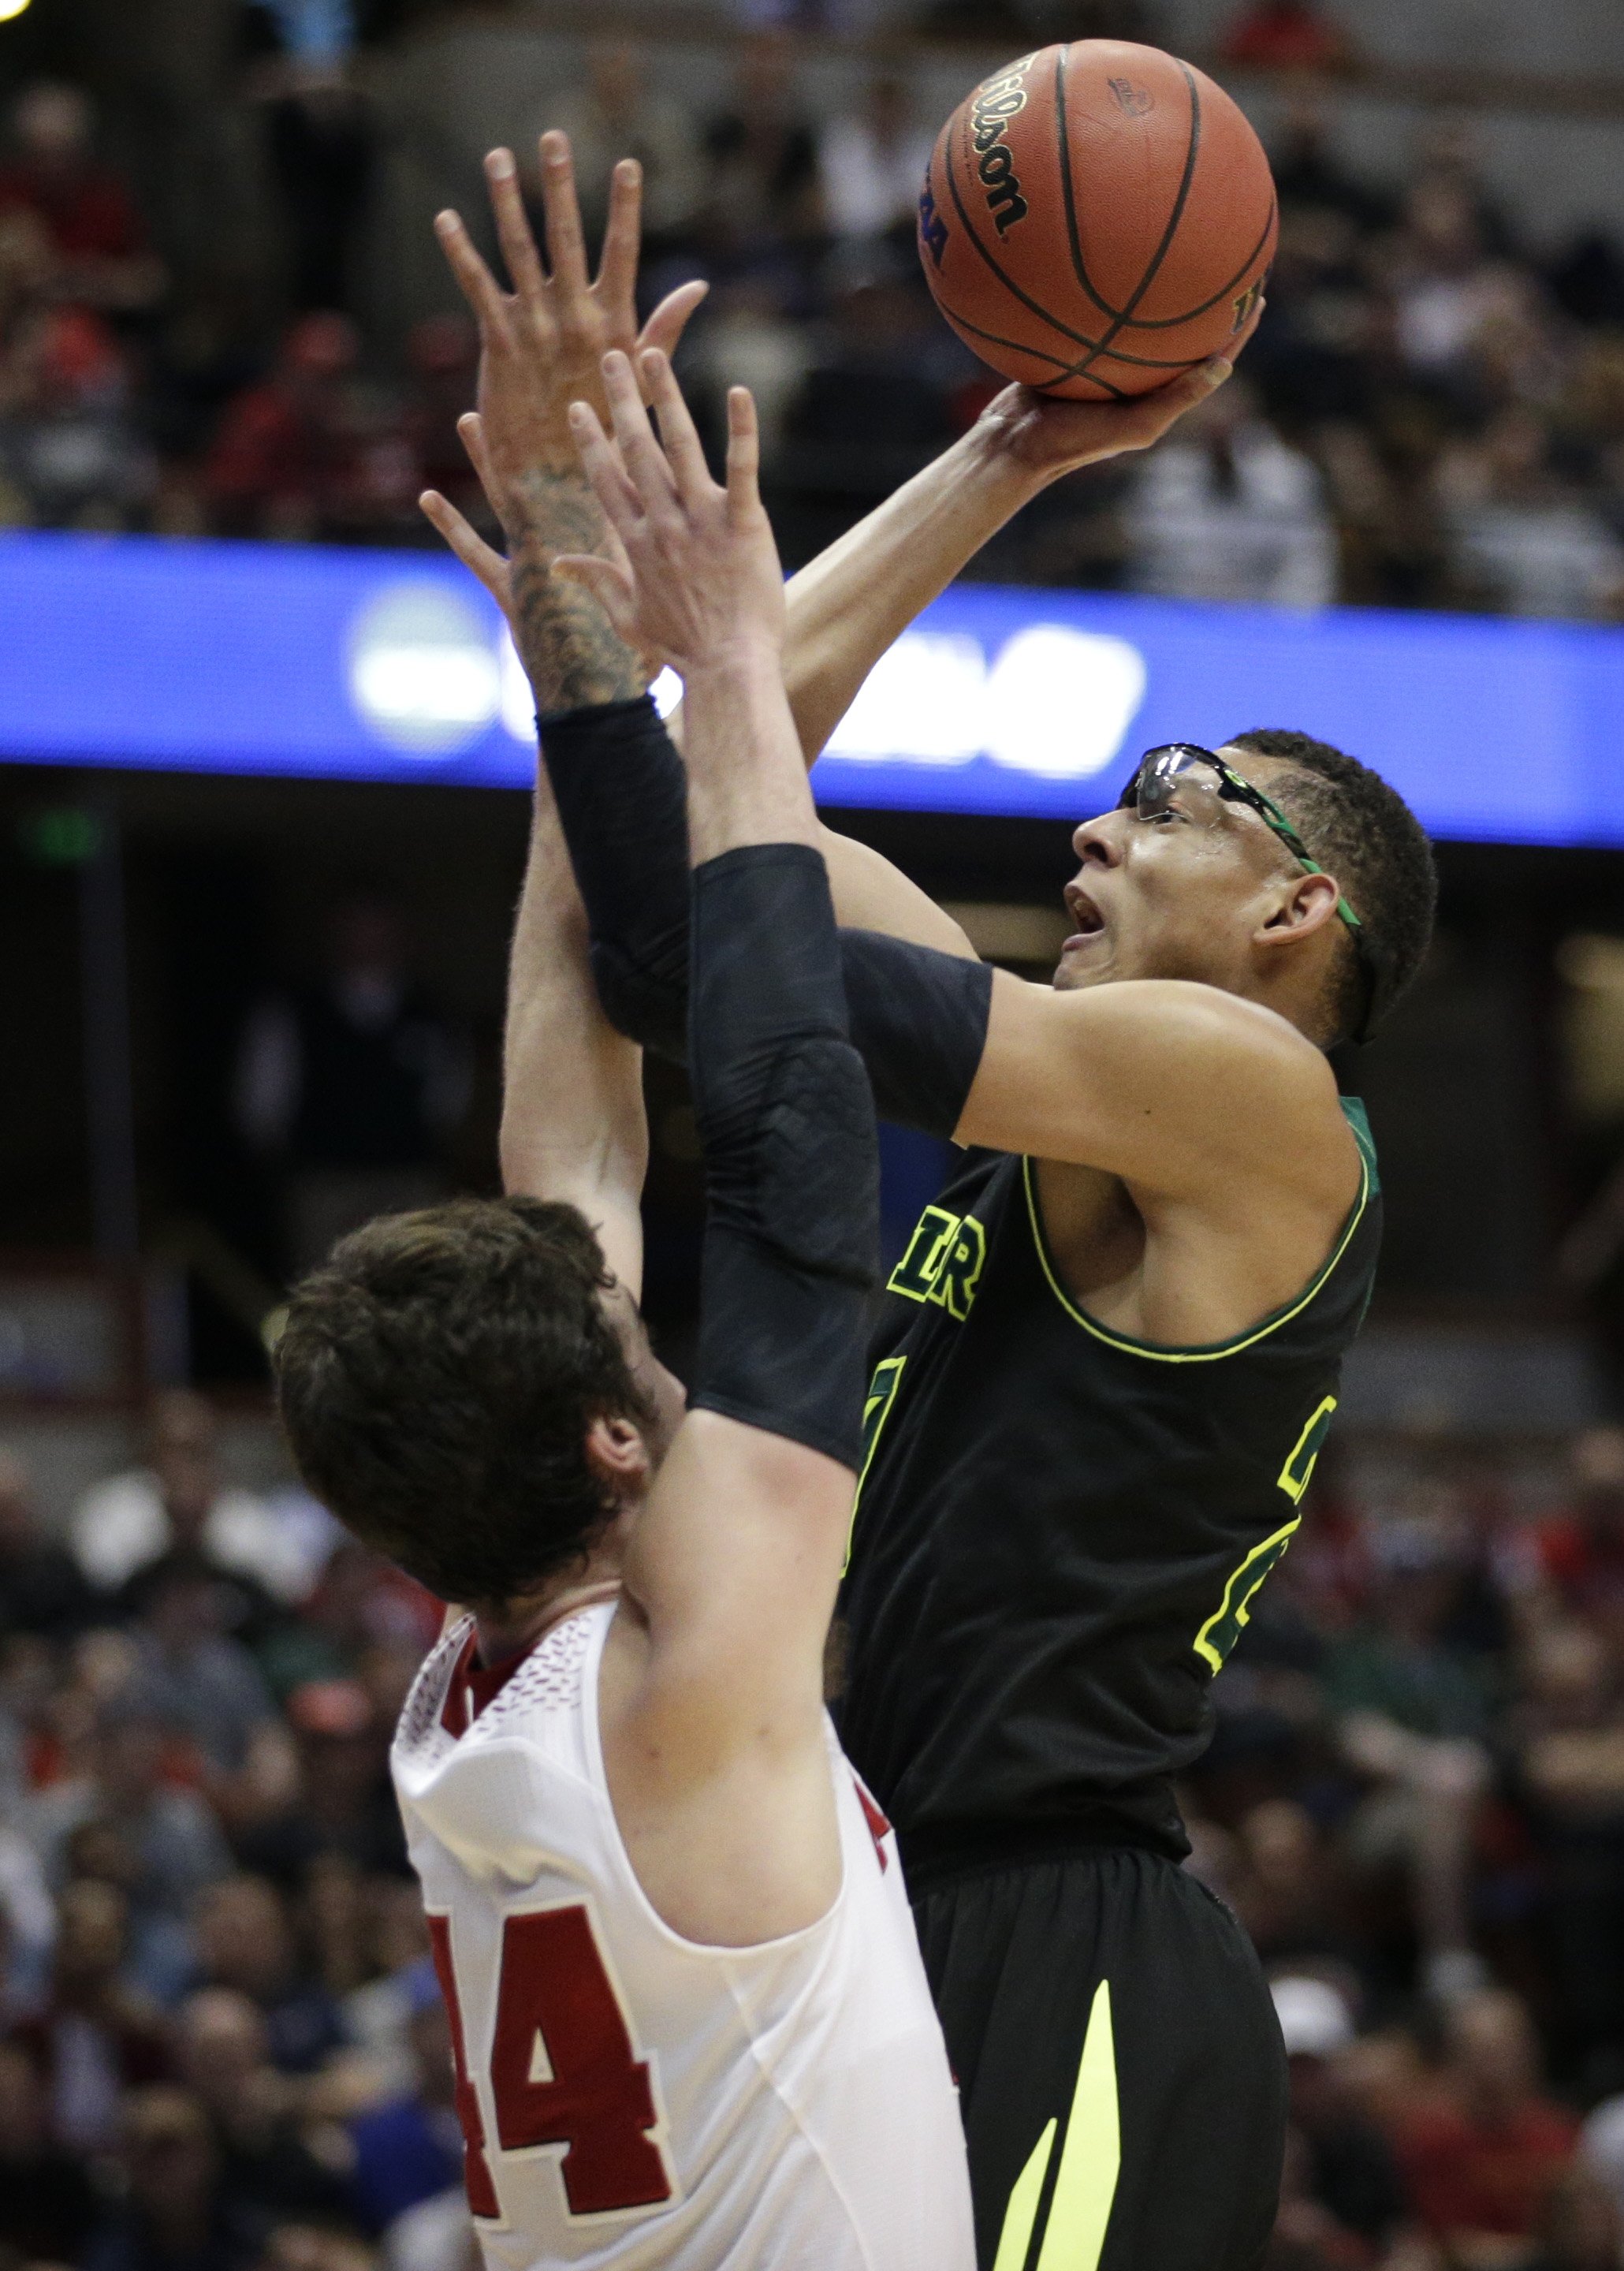 Baylor center Isaiah Austin shoots during the second half of an NCAA men's college basketball tournament regional semifinal, in Anaheim, Calif. on March 27, 2014.